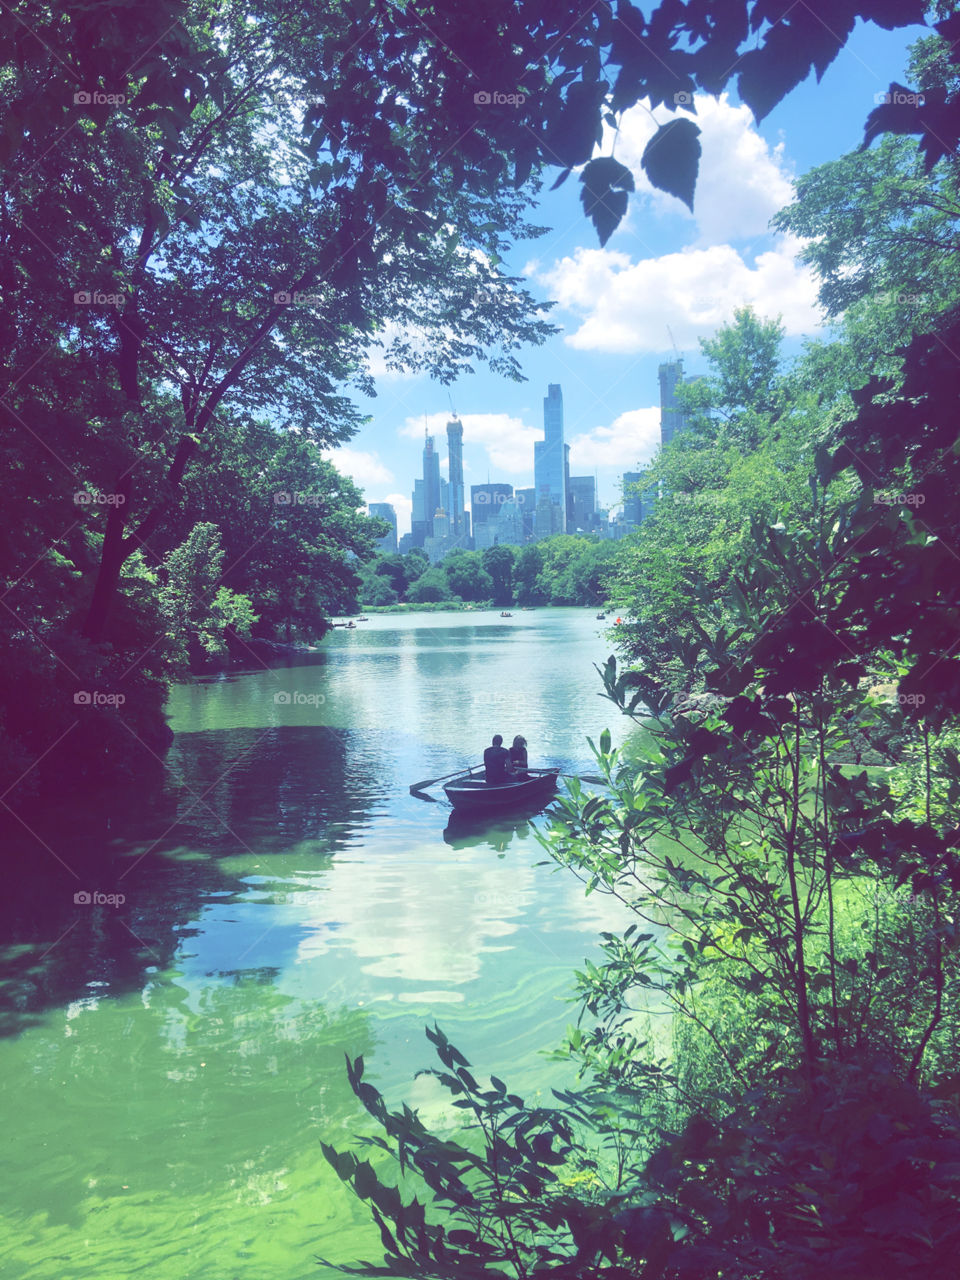 Two lovers in New York - a breathtaking photo of two lovers taking a boat ride in Central Park, surrounded by love and nature; overlooked by the busy city in the distance ❤️